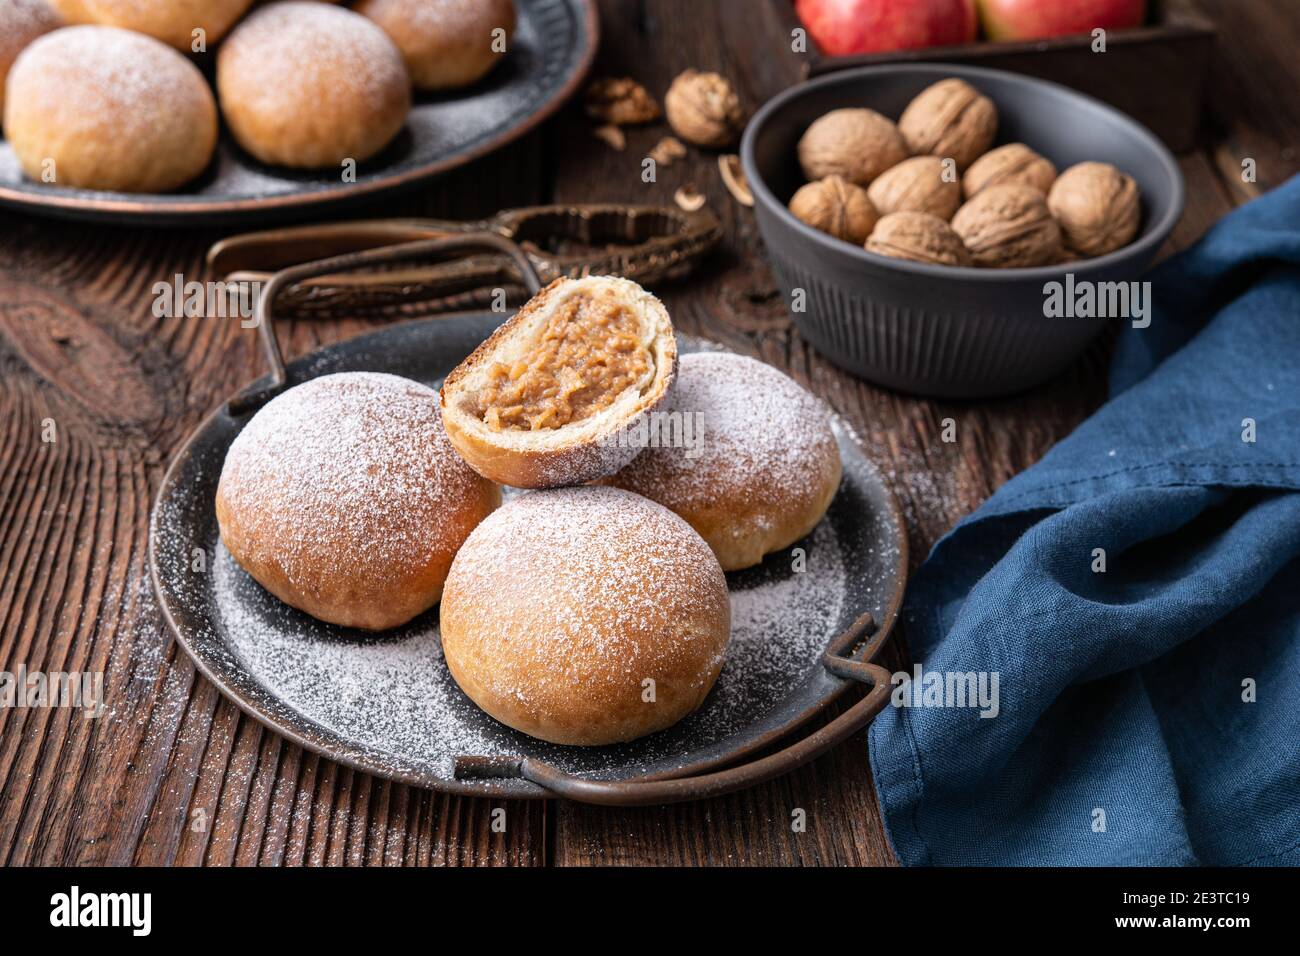 Delicious sweet pastry, baked buns with apple and walnut filling, sprinkled with powdered sugar Stock Photo